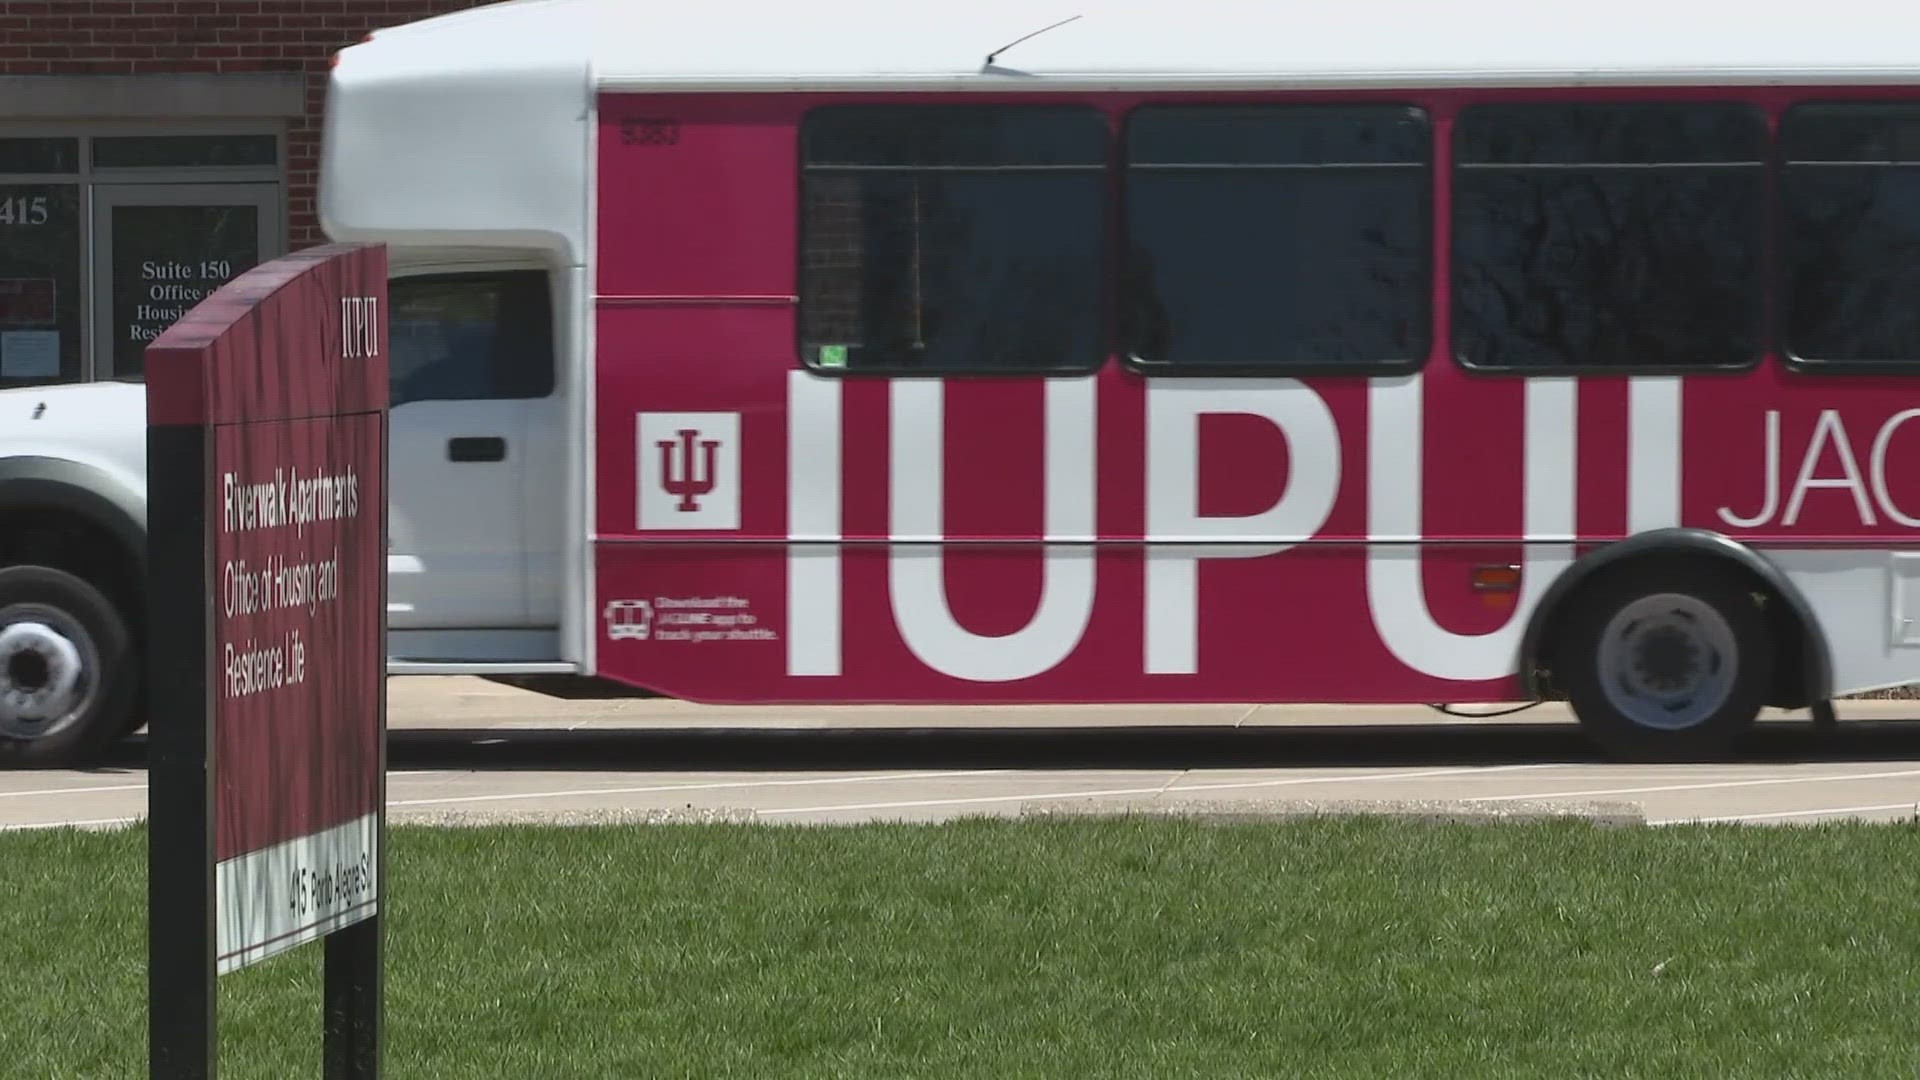 Indianapolis Public Schools want to simplify the college enrollment process for its students, so they partnered with Indiana University Indianapolis.